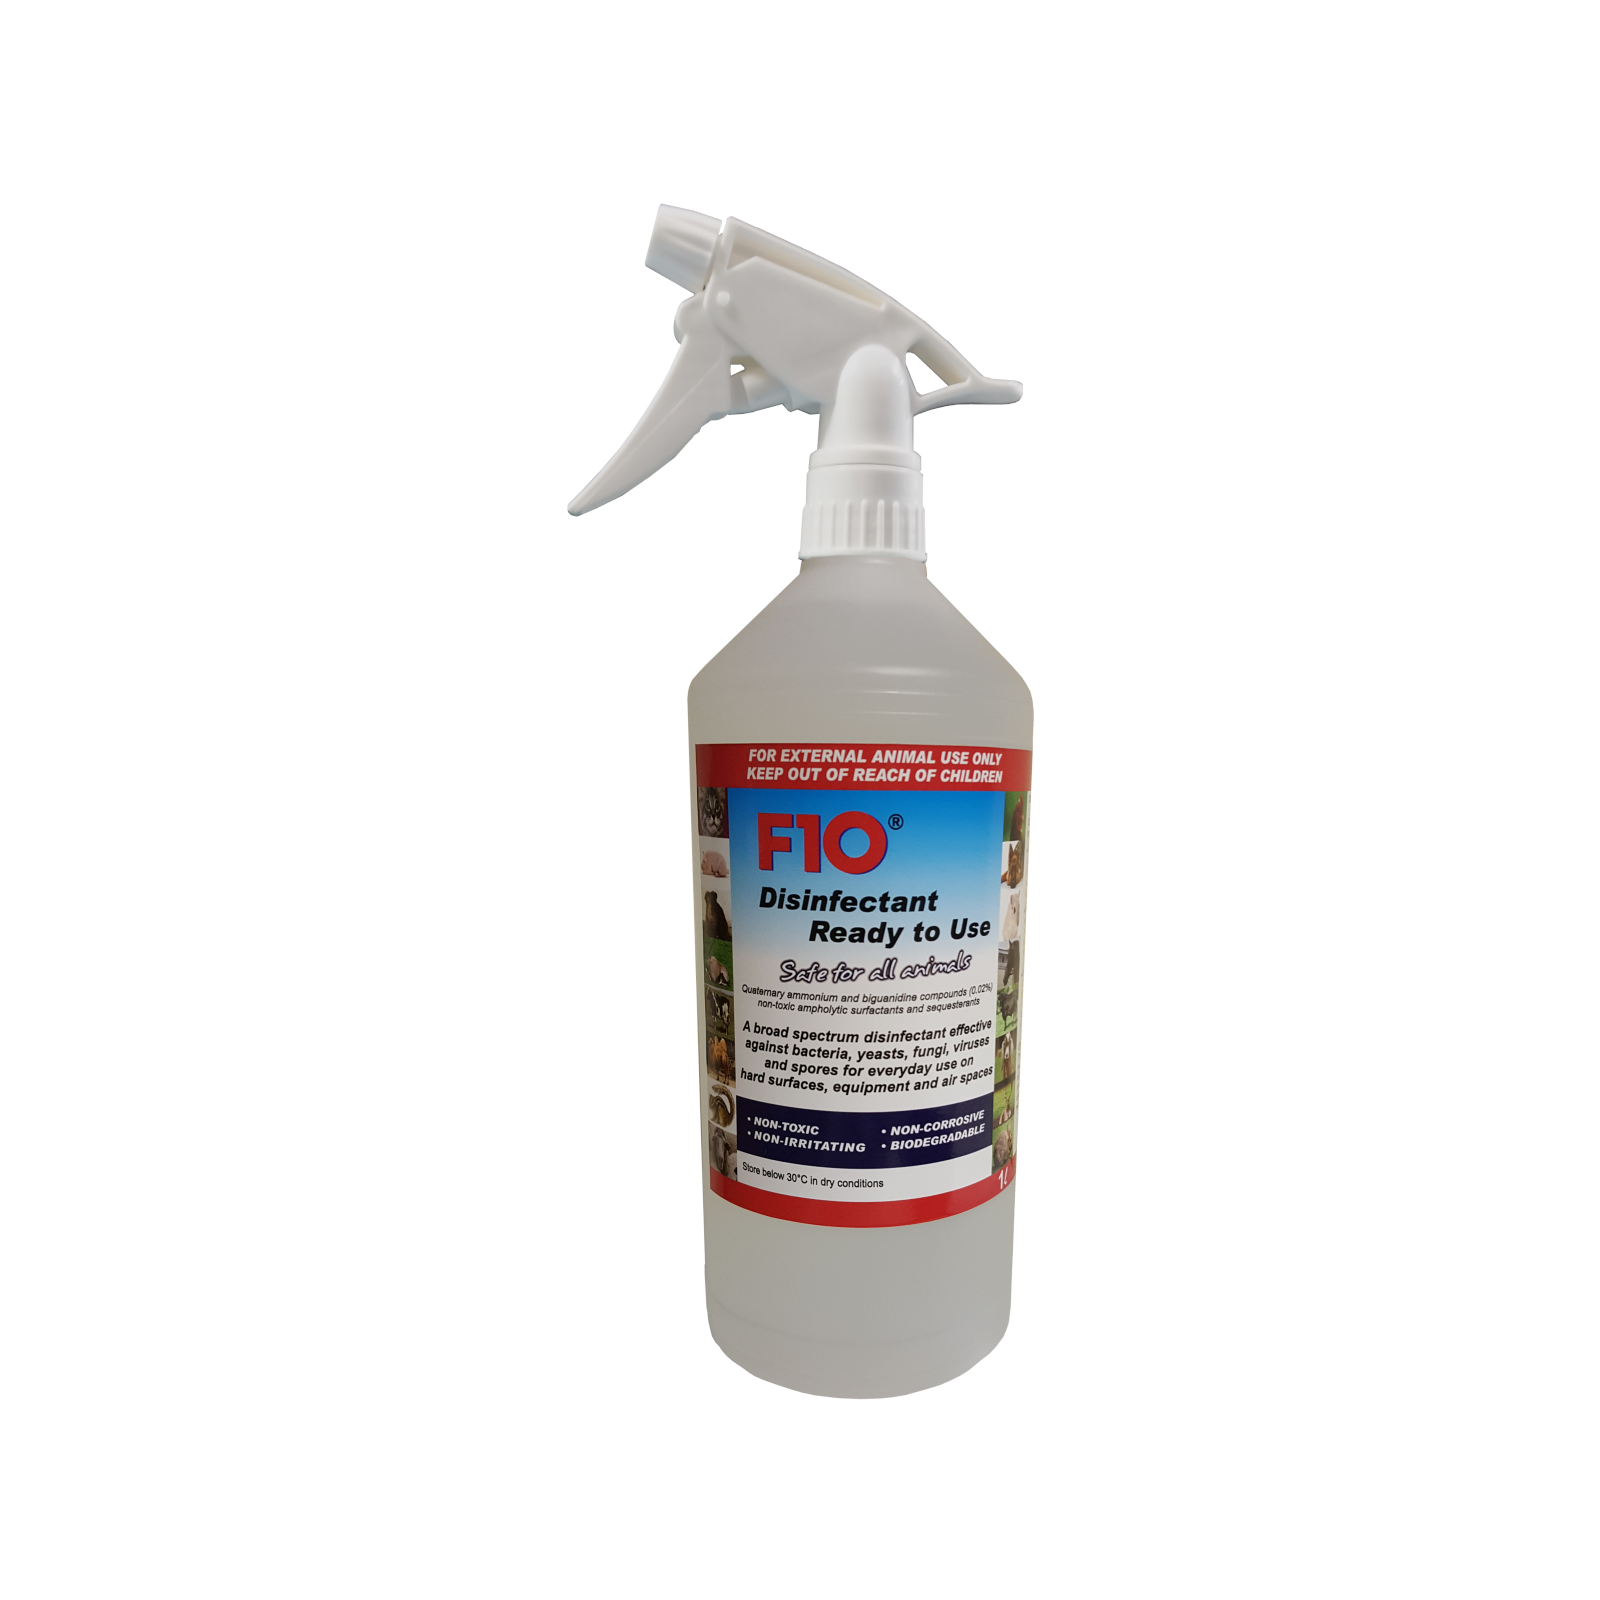 A 1 litre bottle of F10 Disinfectant Ready to Use with a trigger spray